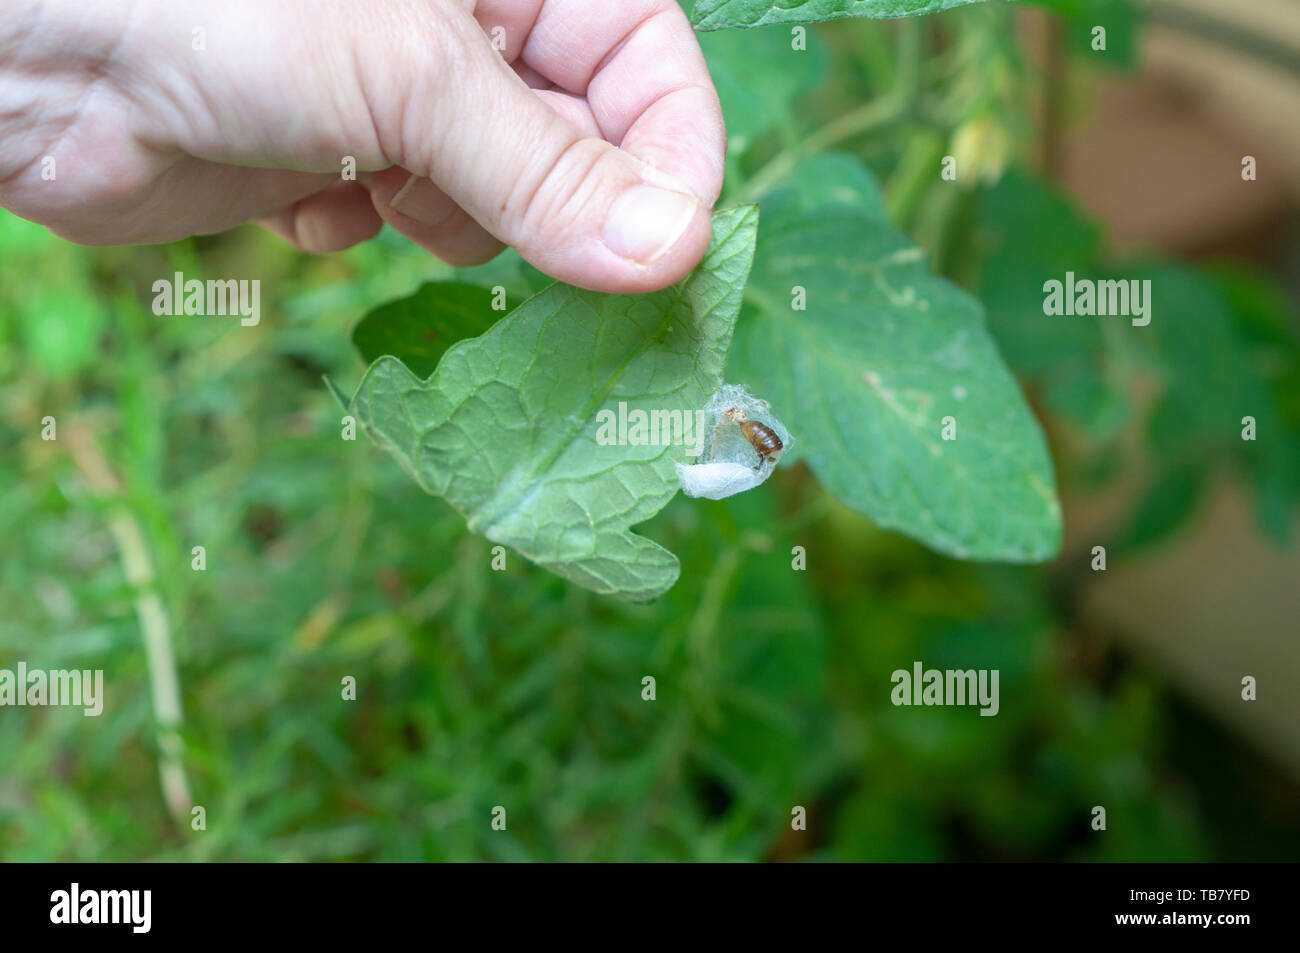 Caterpillar builds its cocoon on a leaf Photographed in Israel in May Stock Photo